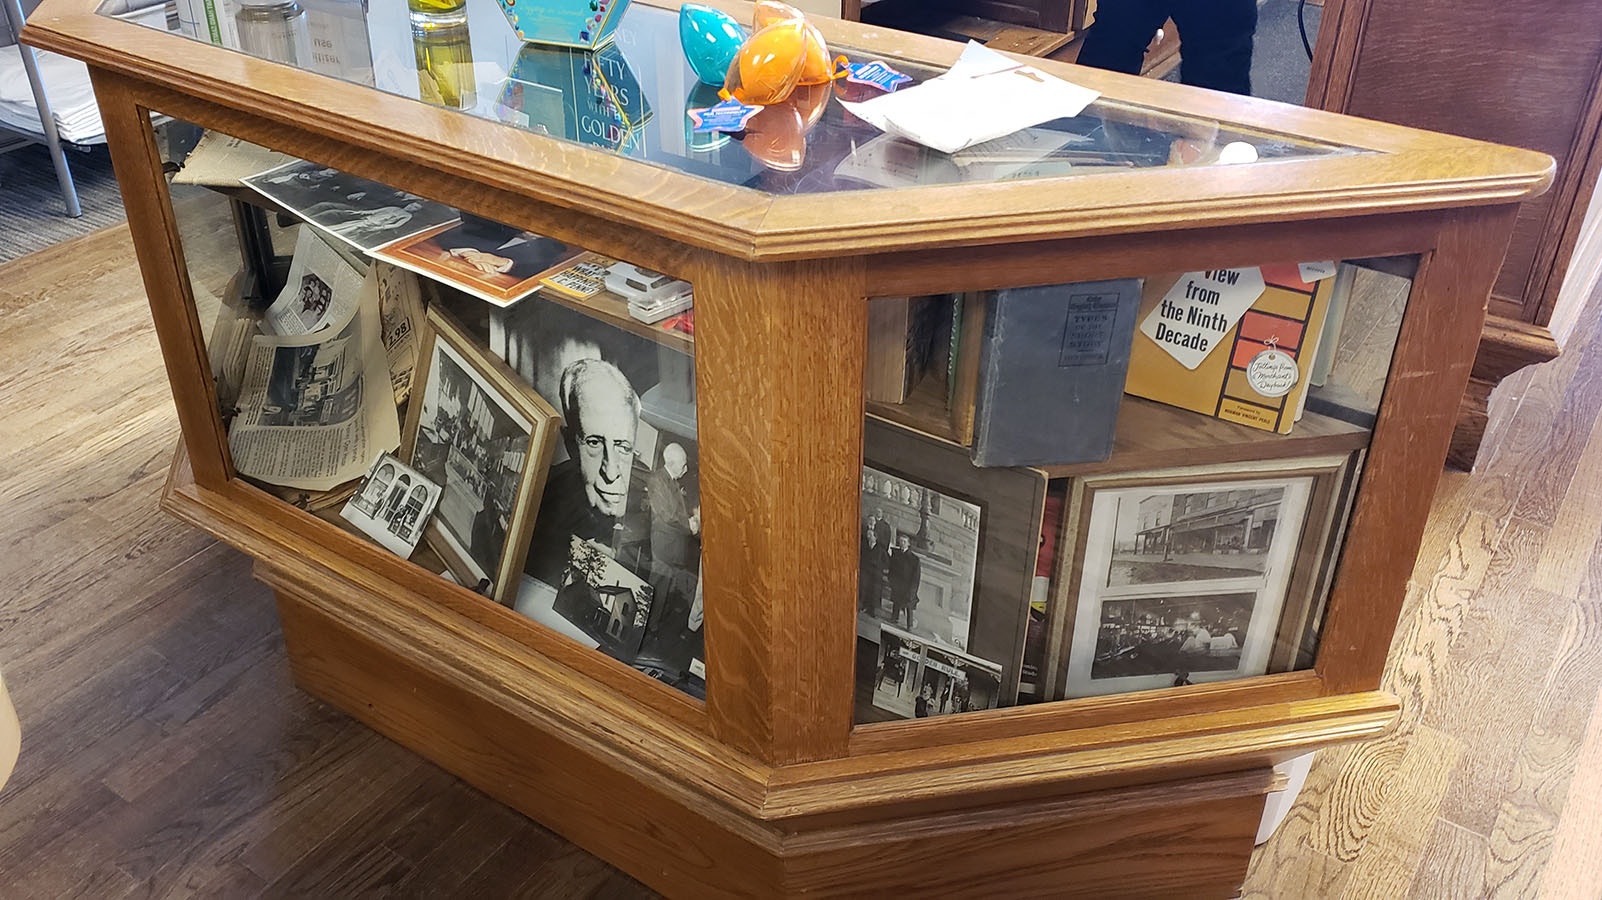 Some photos and memorabilia are displayed in the store.